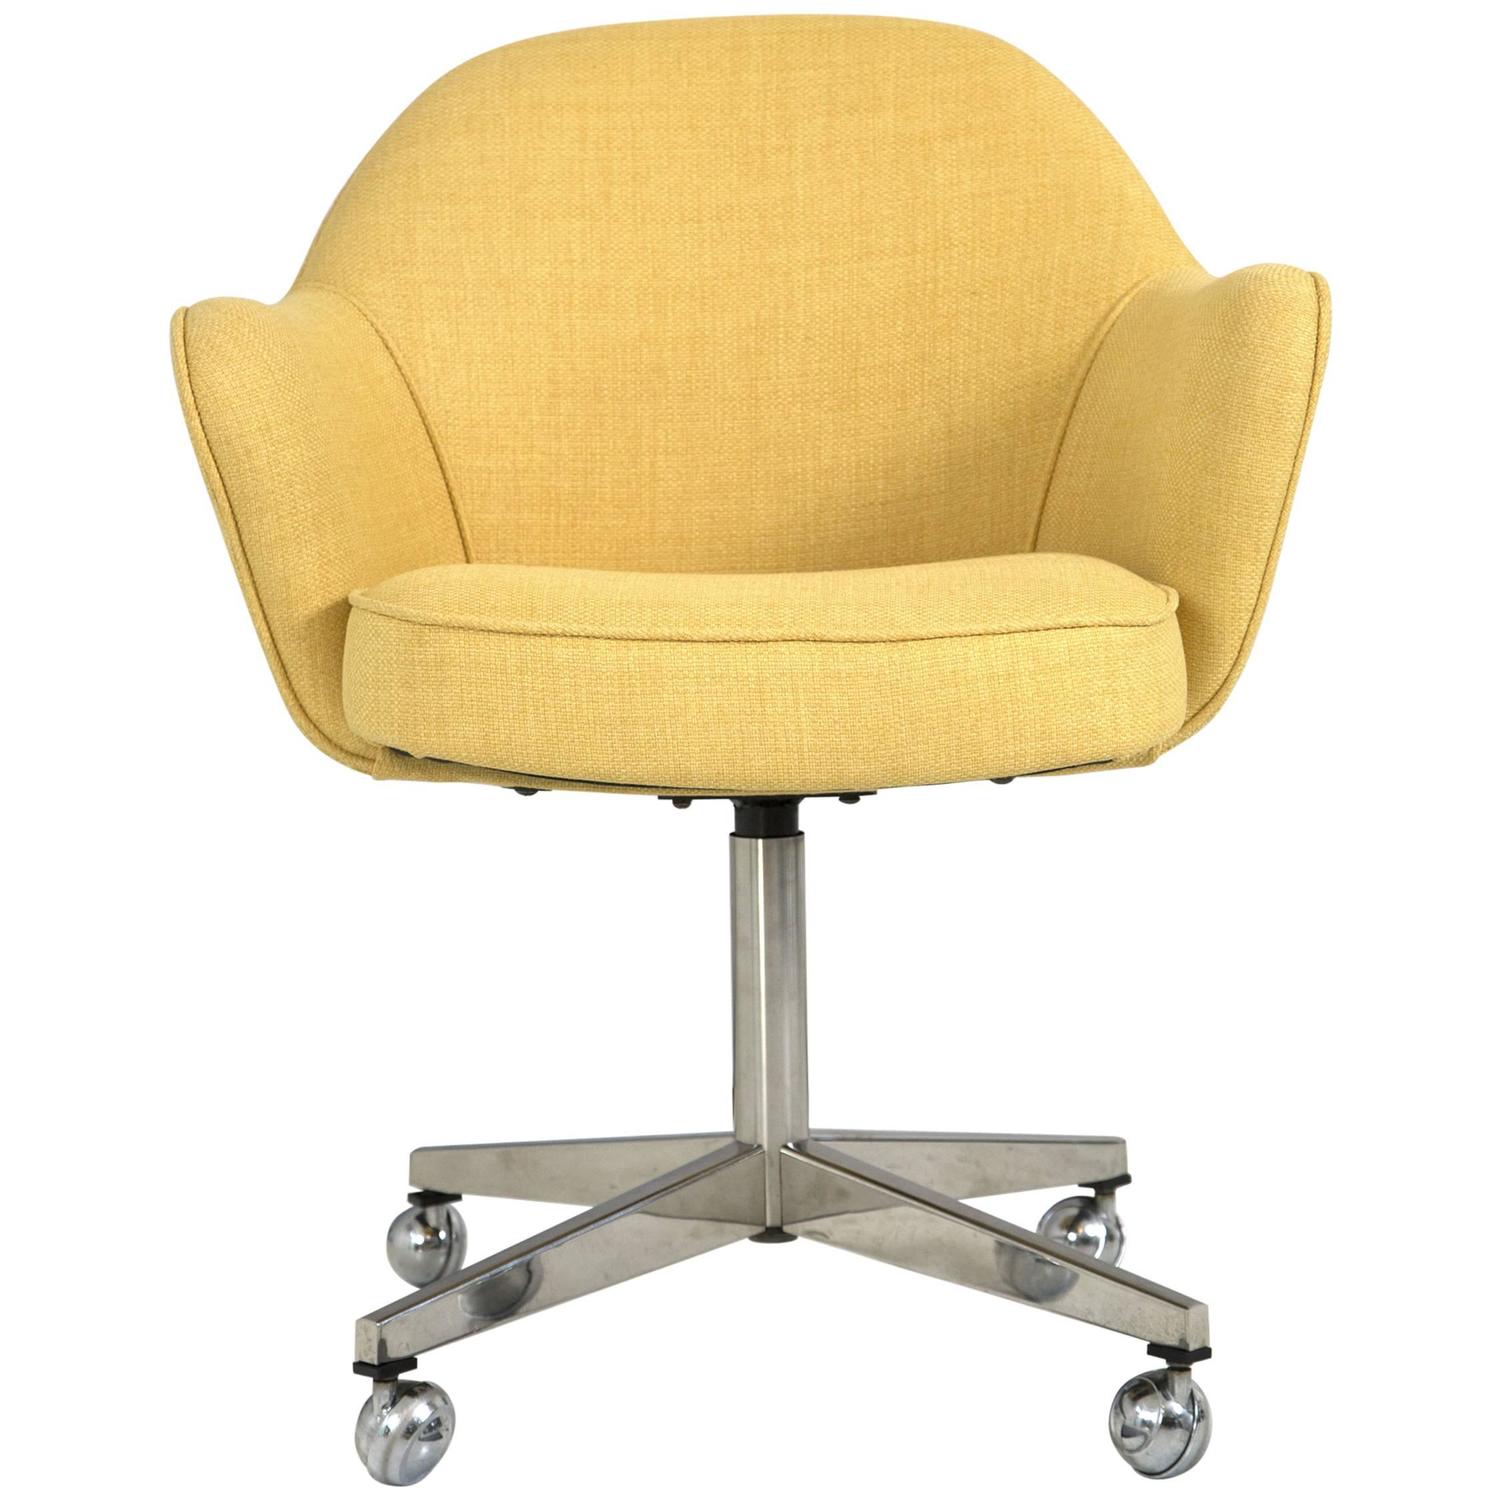 Knoll Desk Chair in Yellow Microfiber For Sale at 1stdibs